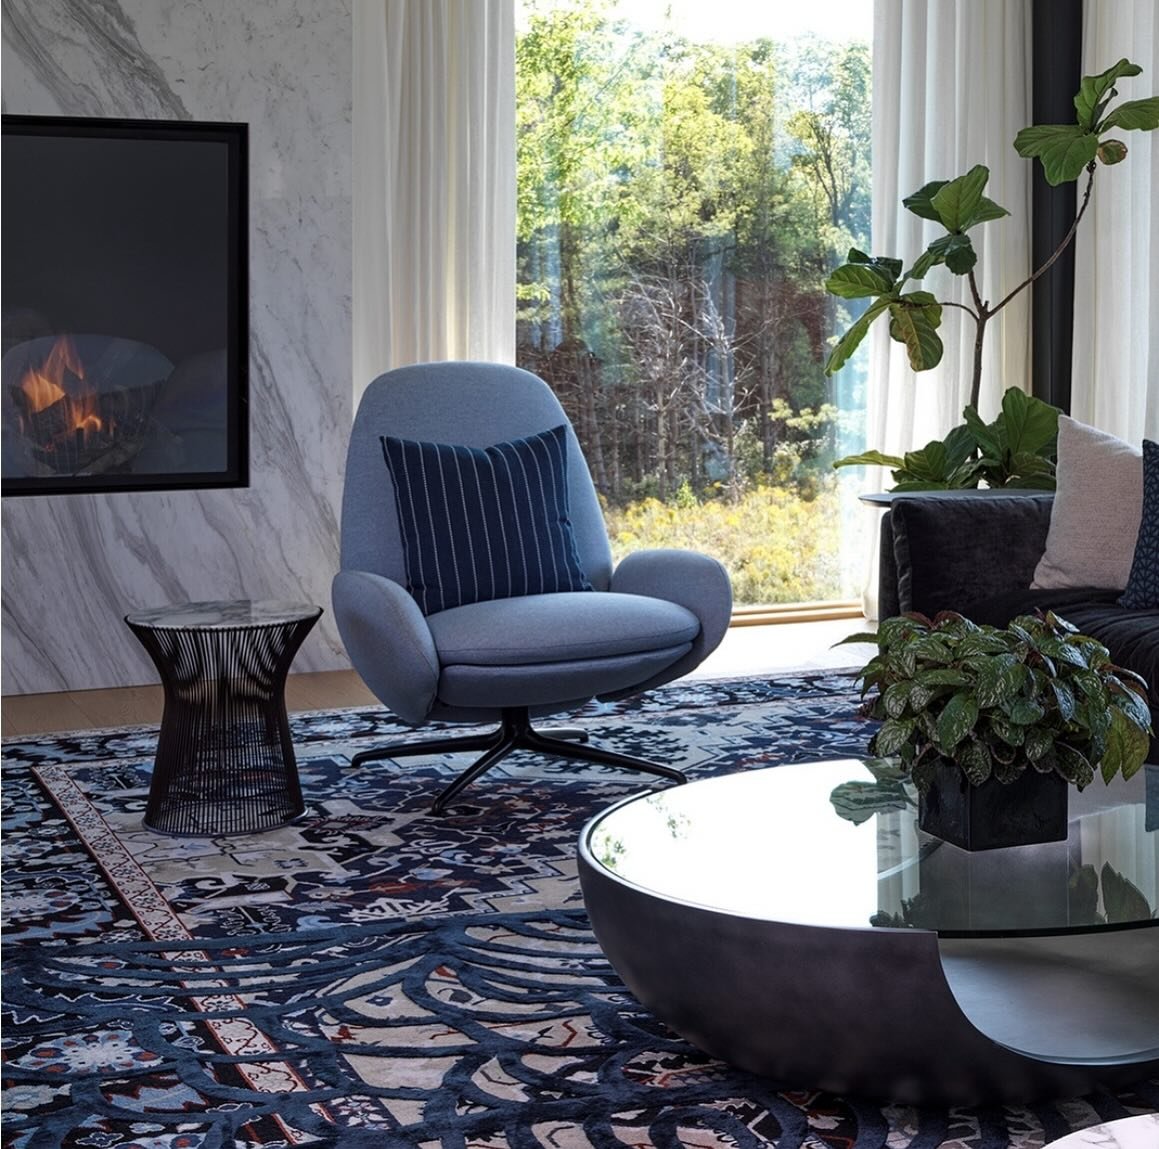 Step into @mcnicolinteriordesigns project where they meticulously crafted a bespoke rug to set the tone for an elegant cocktail lounge. With deep hues, plush sofas, and exquisite craftsmanship, the bespoke rug takes center stage, offering both style 